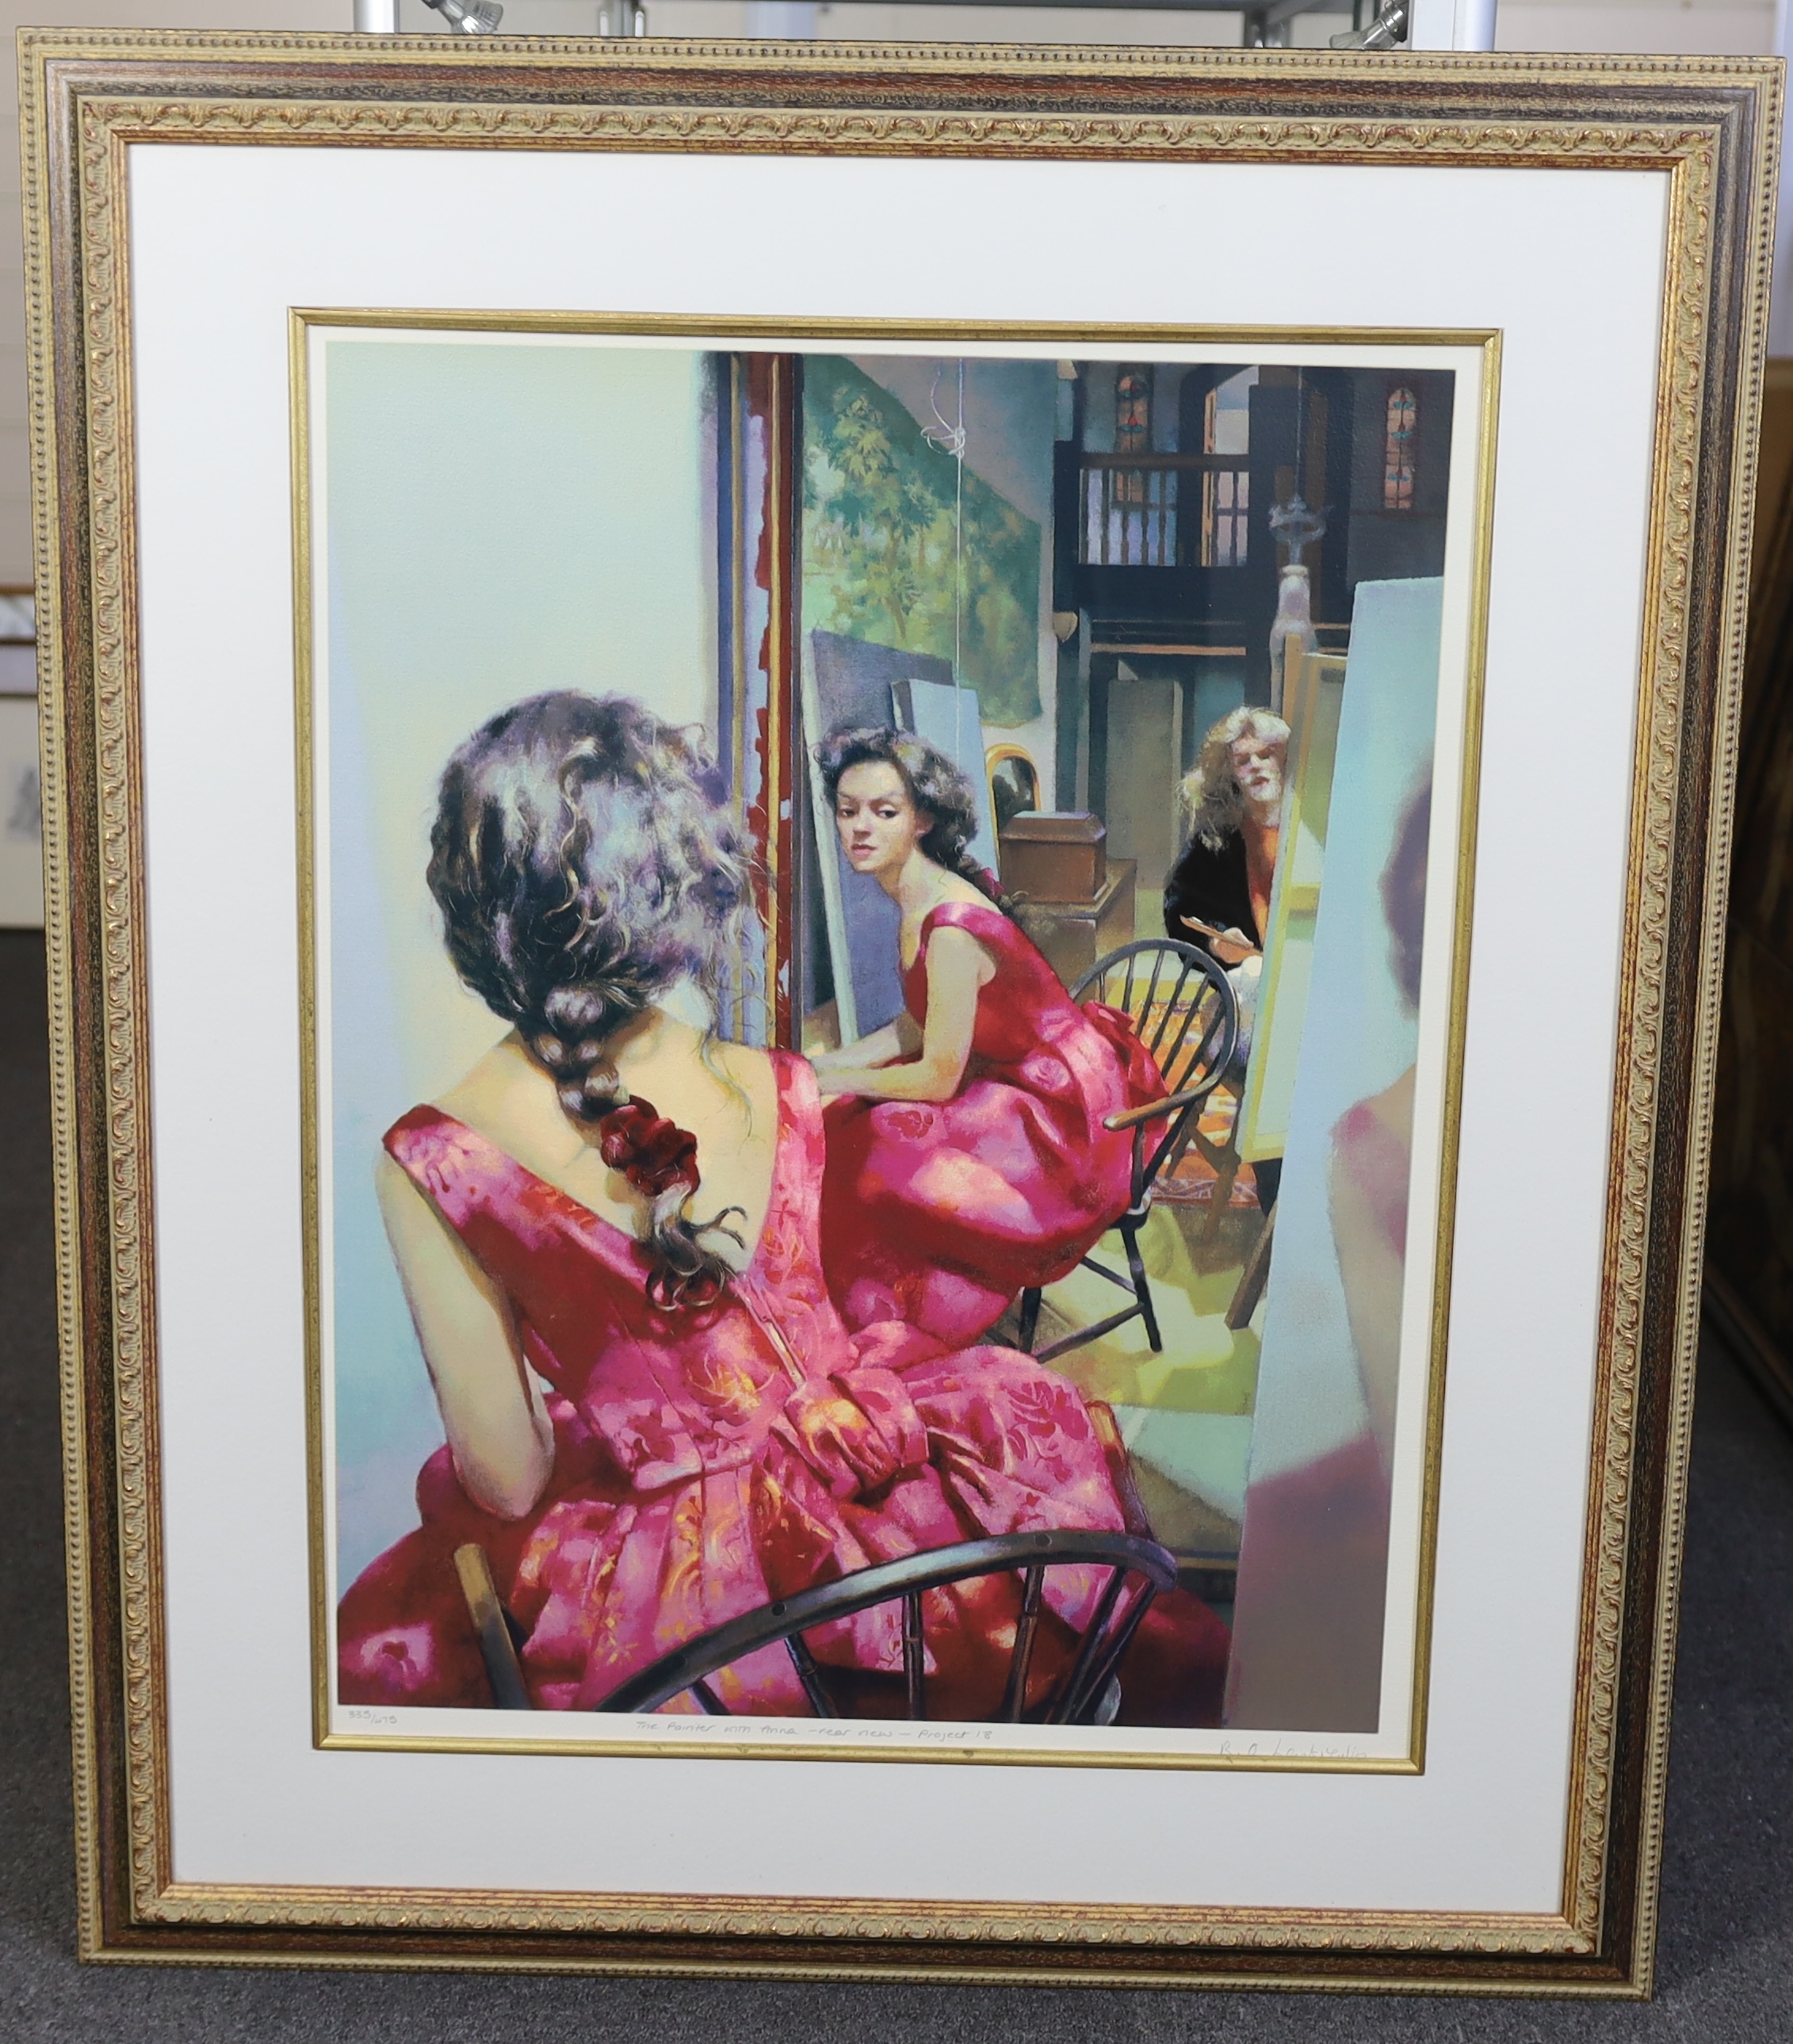 Robert Lenkiewicz (1941-2002), offset lithograph, 'The Painter with Anna - rear view - Project 18', signed in pencil and titled, 335/475, 76 x 59cm. Condition - good